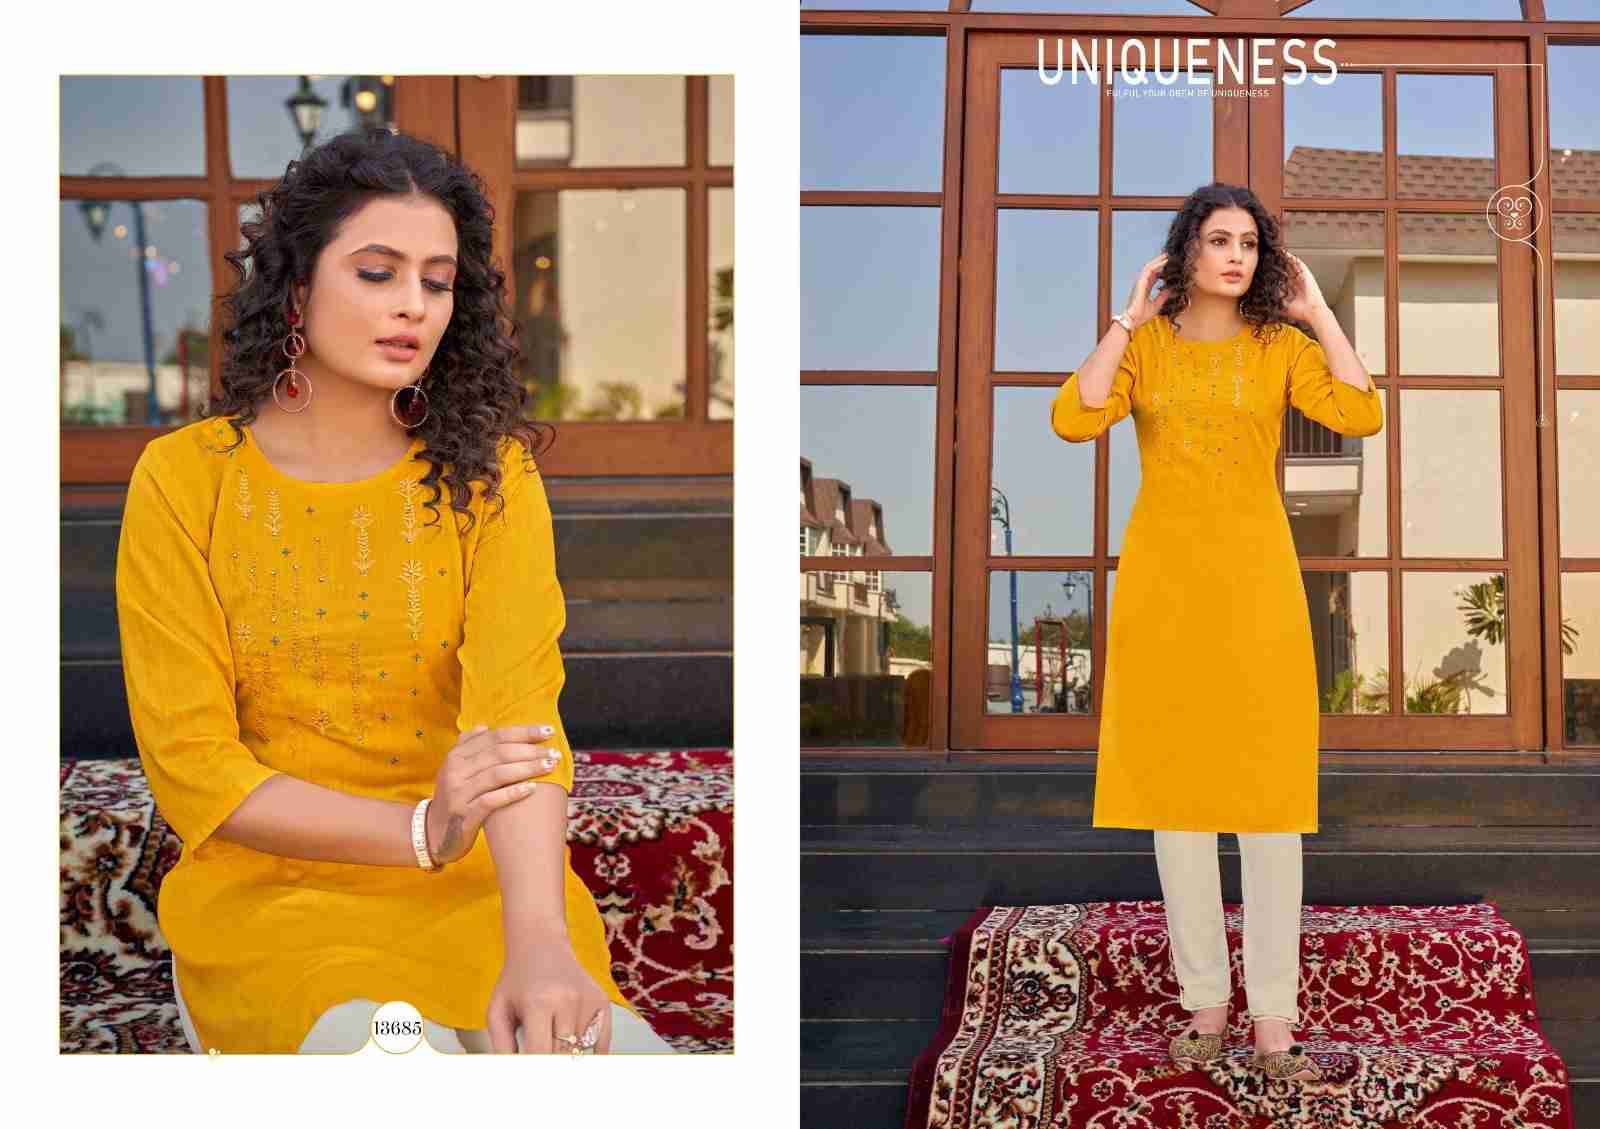 Scarlet By Kalaroop 13682 To 13687 Series Designer Stylish Fancy Colorful Beautiful Party Wear & Ethnic Wear Collection Heavy Rayon Kurtis At Wholesale Price